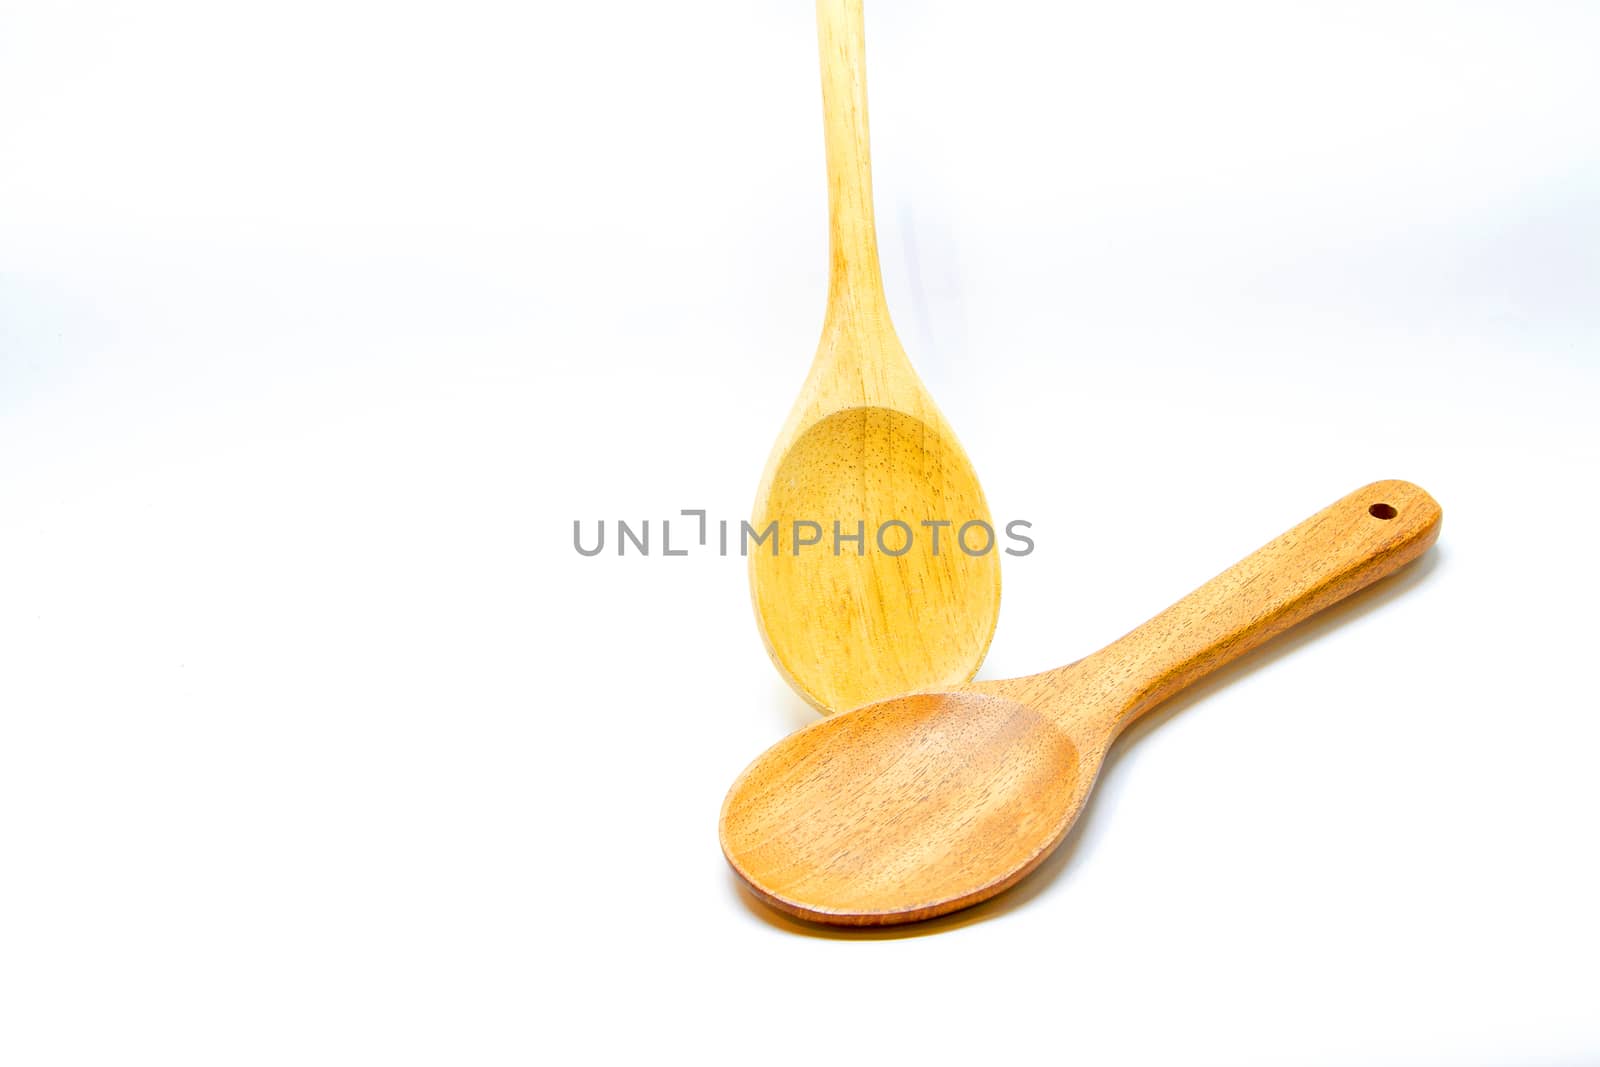 Two Brown wooden spoon on white background by TakerWalker